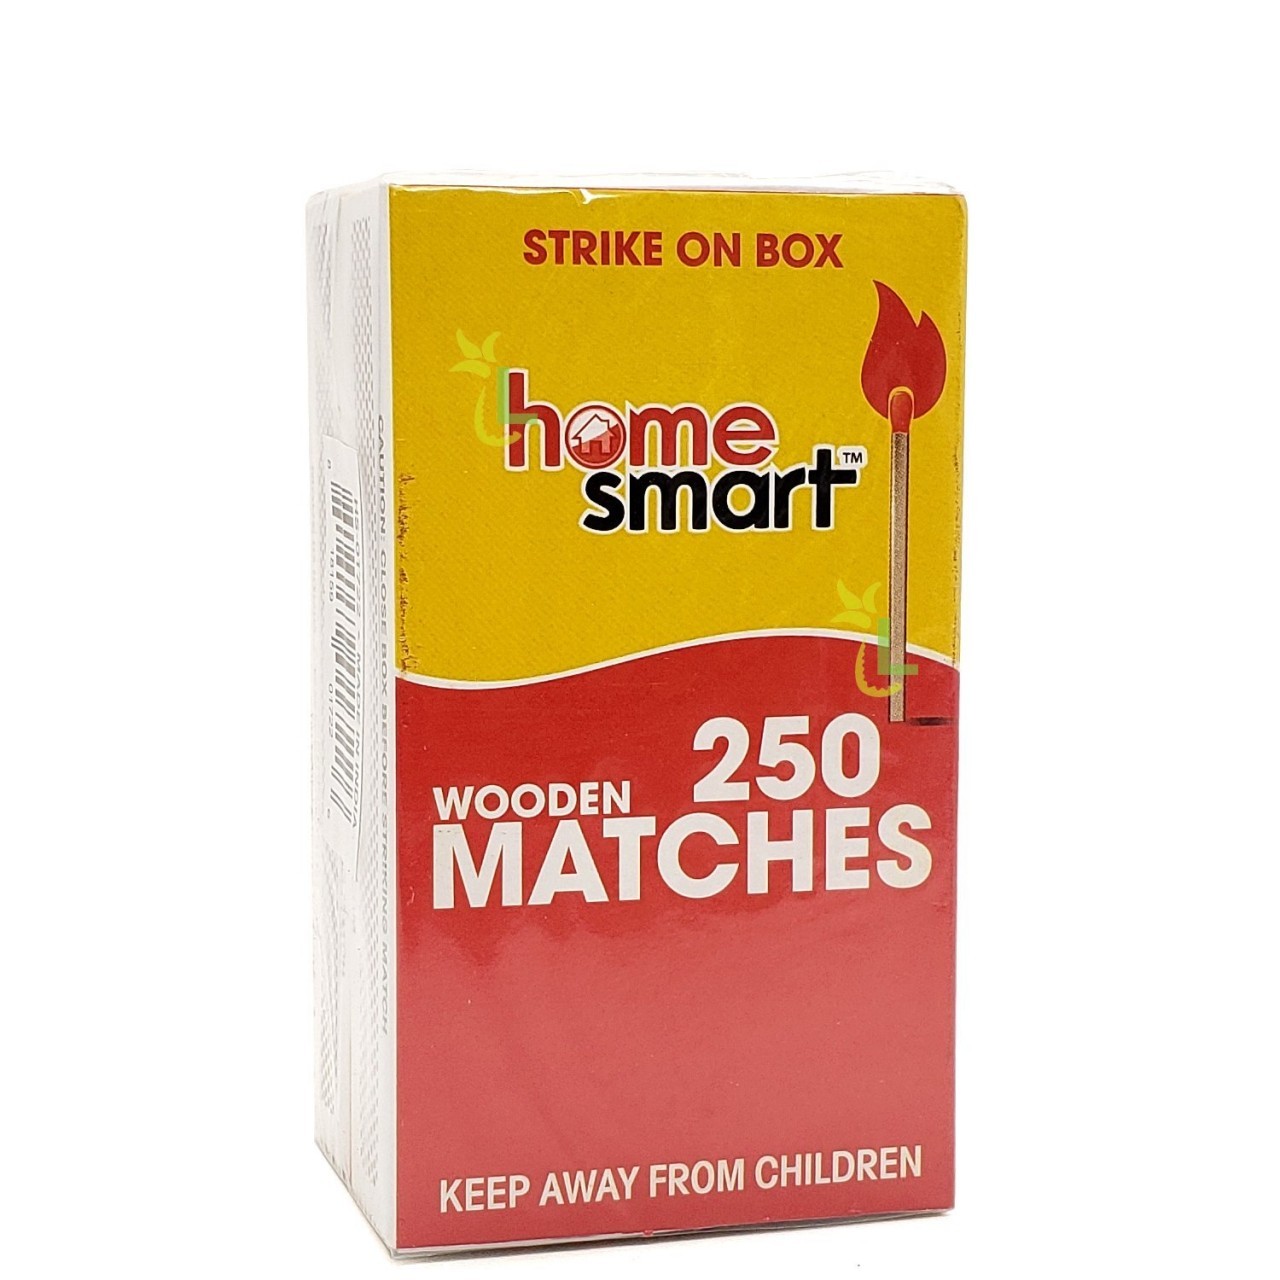 HOME SMART WOODEN MATCHES 2x250s